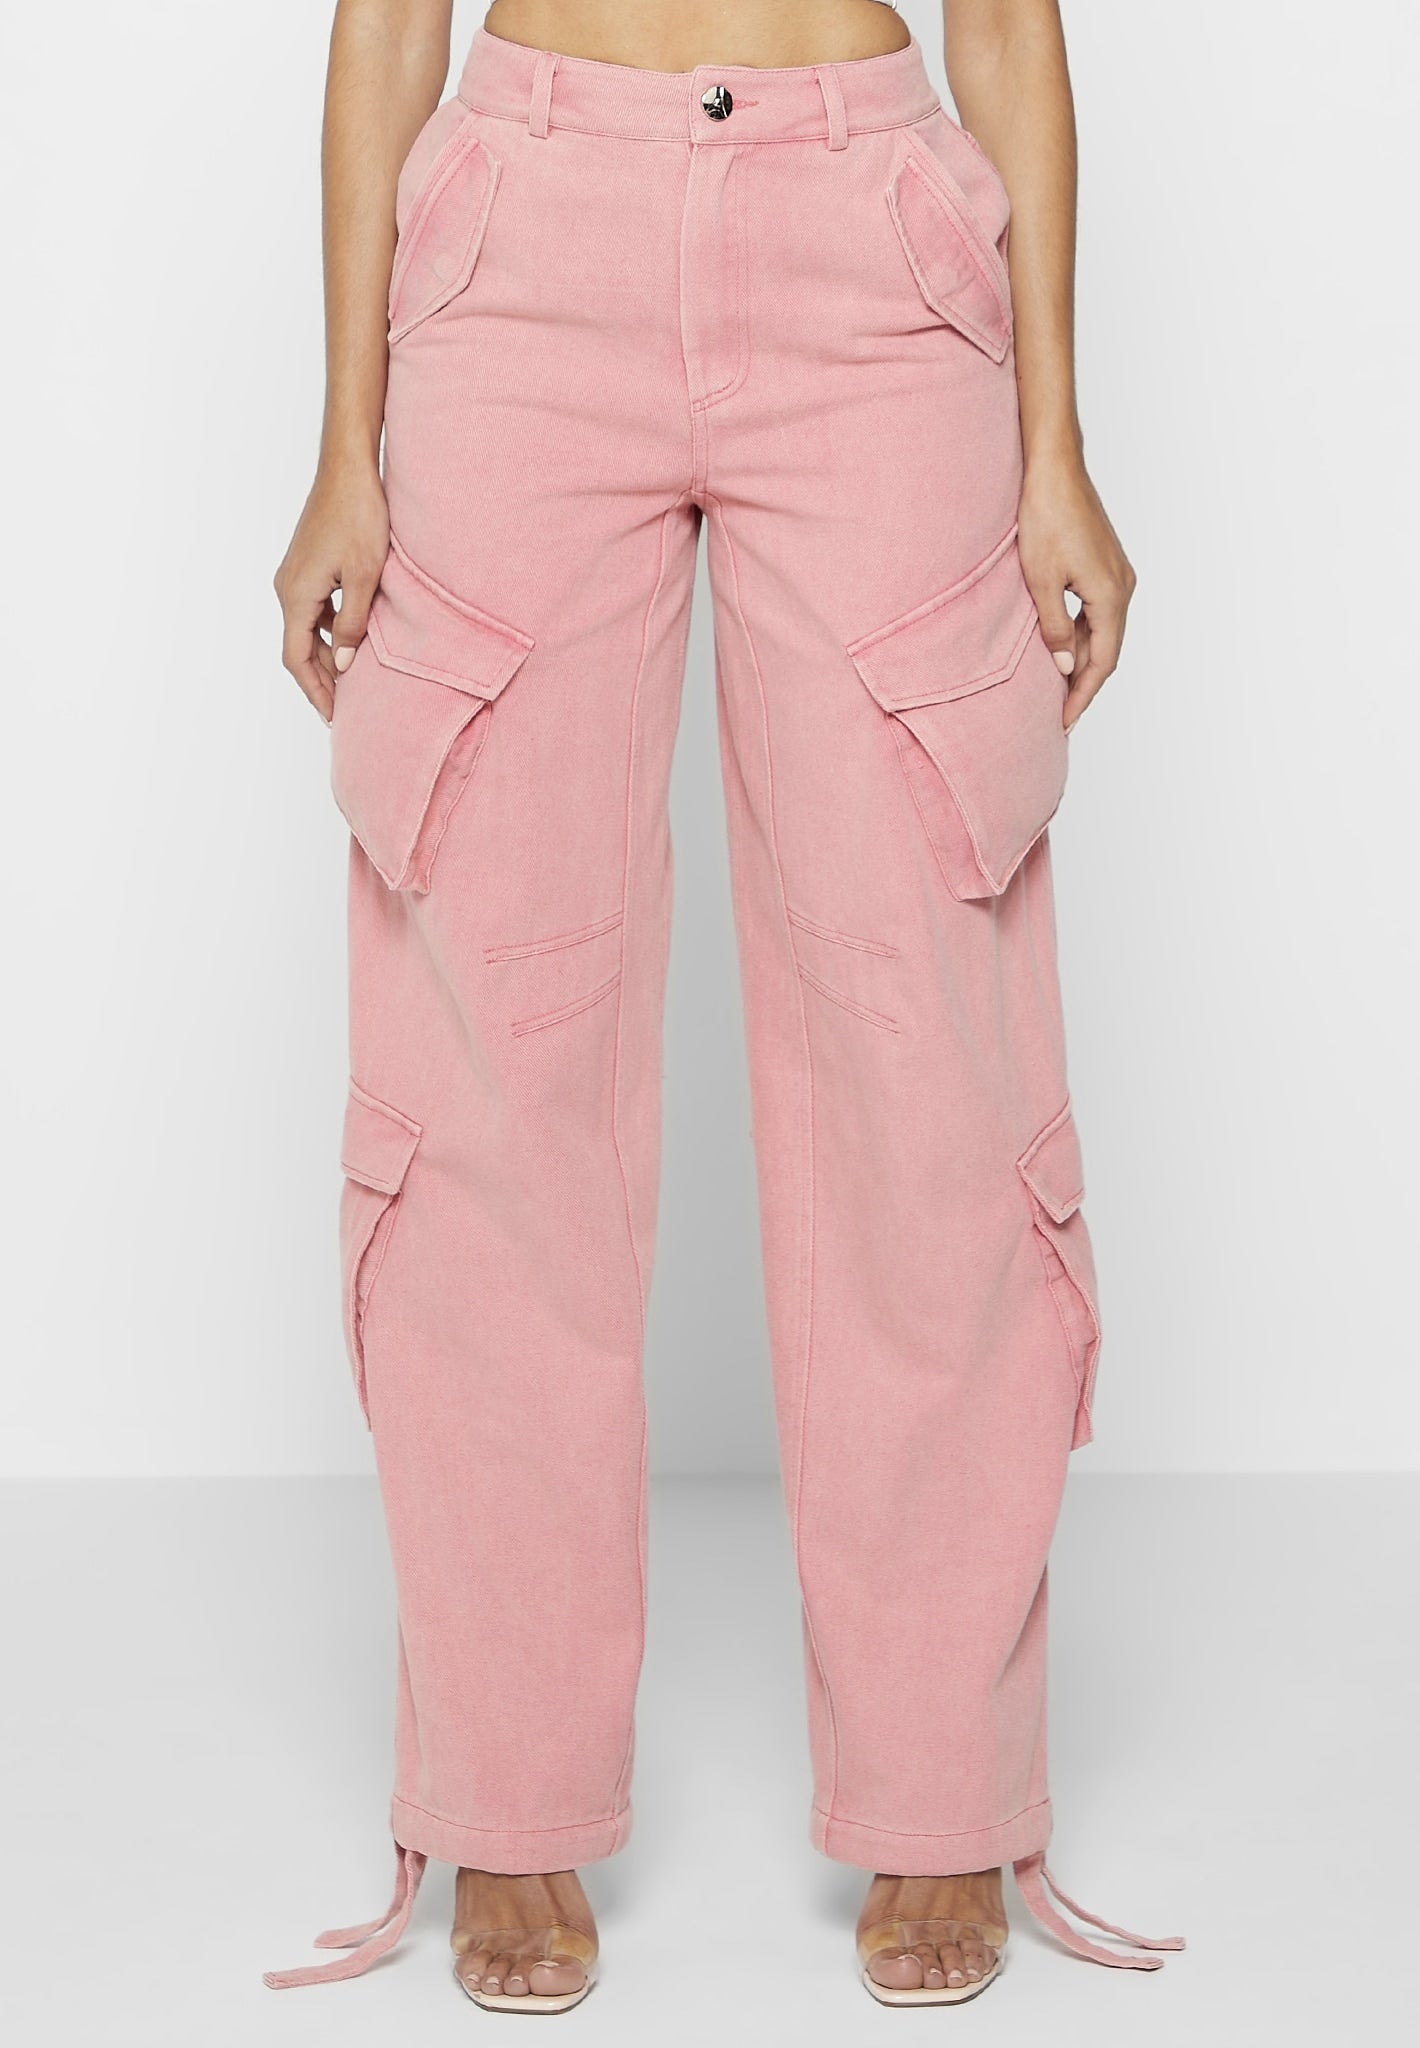 Baby pink cargo pants. Fit high waisted with a - Depop